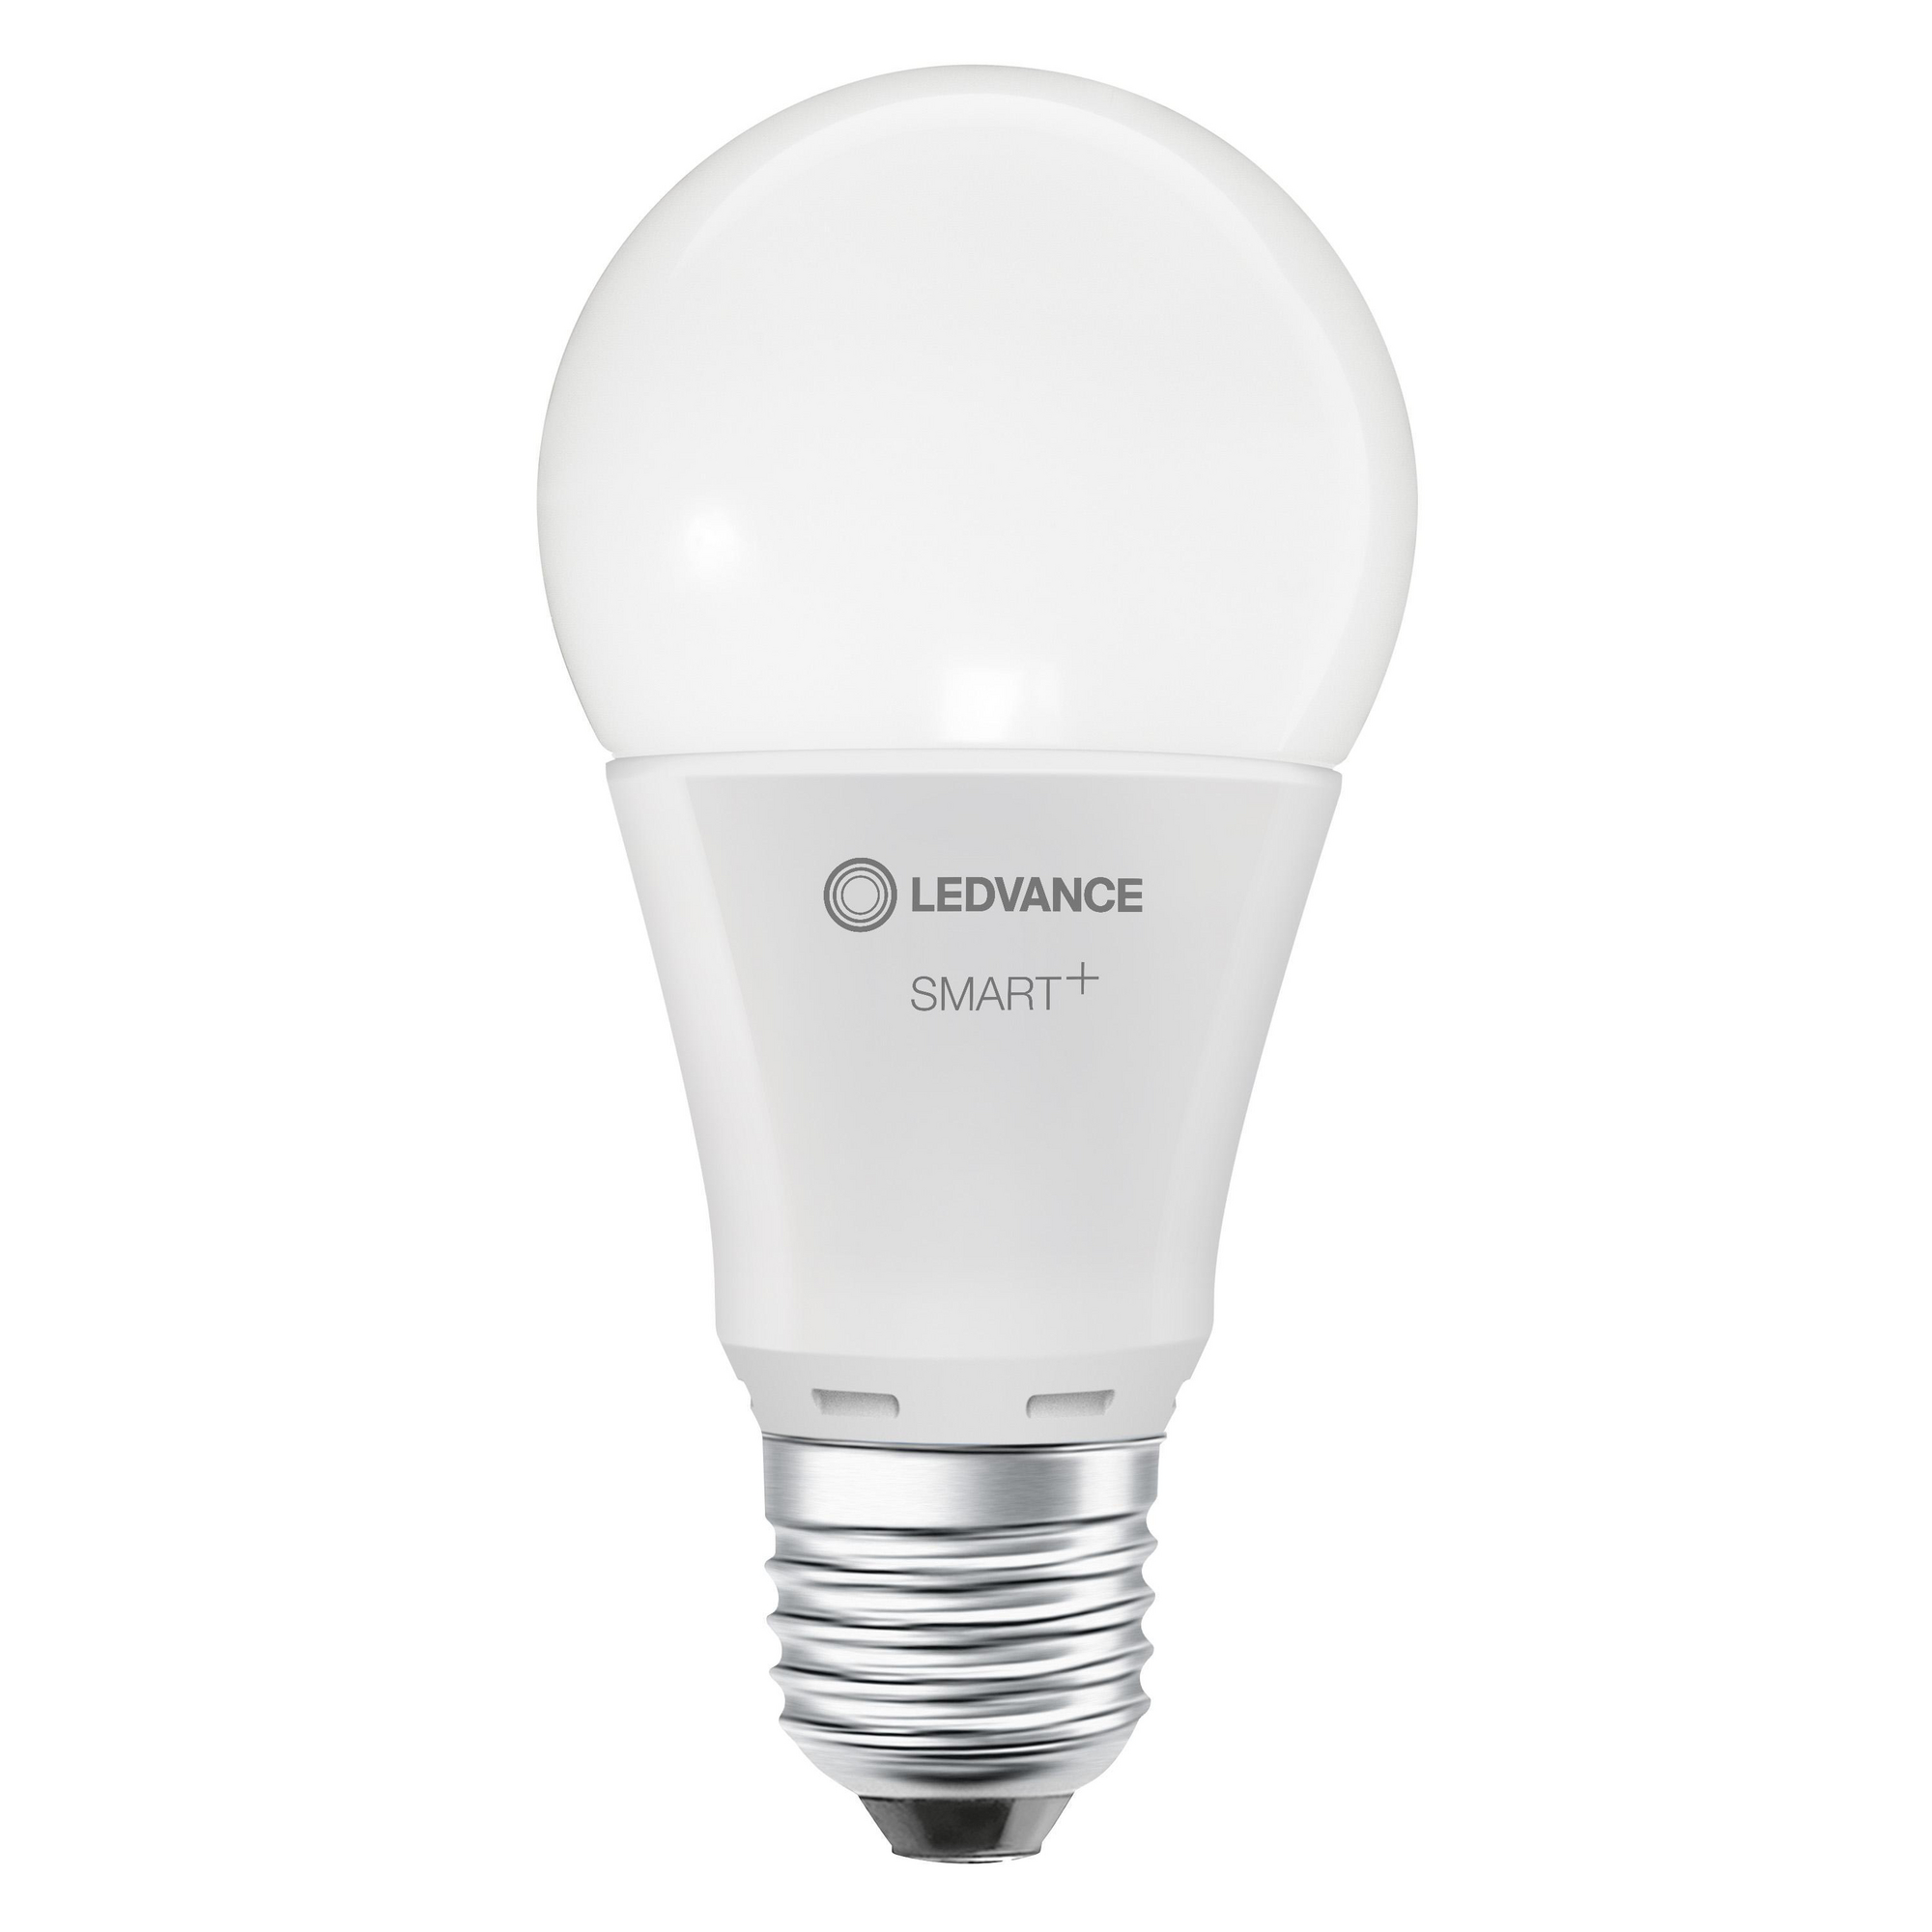 LED-Lampe 'Smart+' 14,2 cm 1521 lm 14 W E27 weiß WLAN dimmbar + product picture